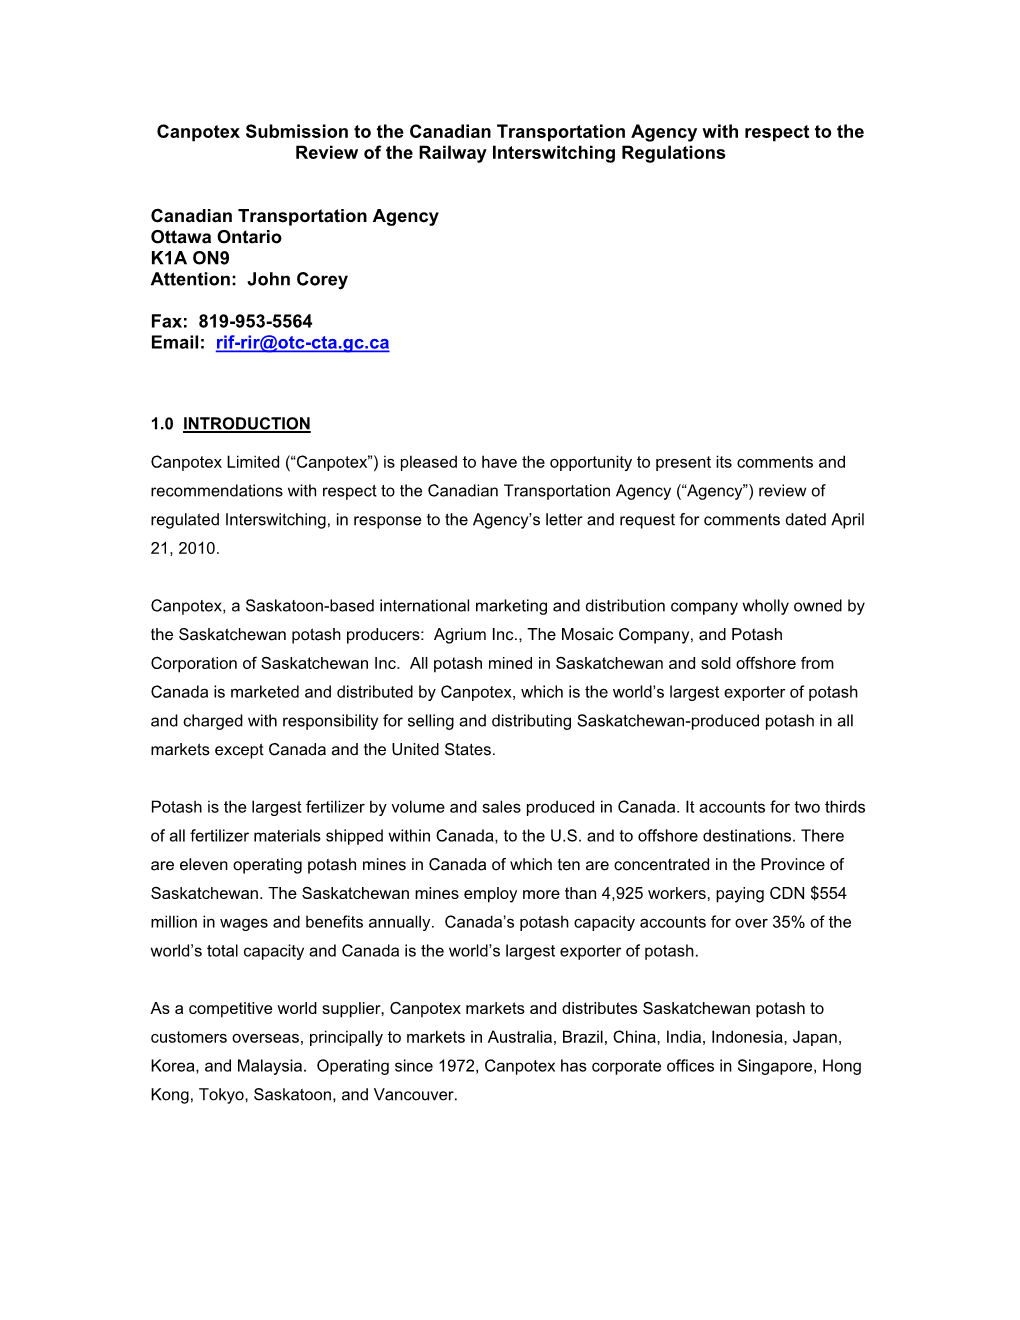 Canpotex Submission to the Canadian Transportation Agency with Respect to the Review of the Railway Interswitching Regulations